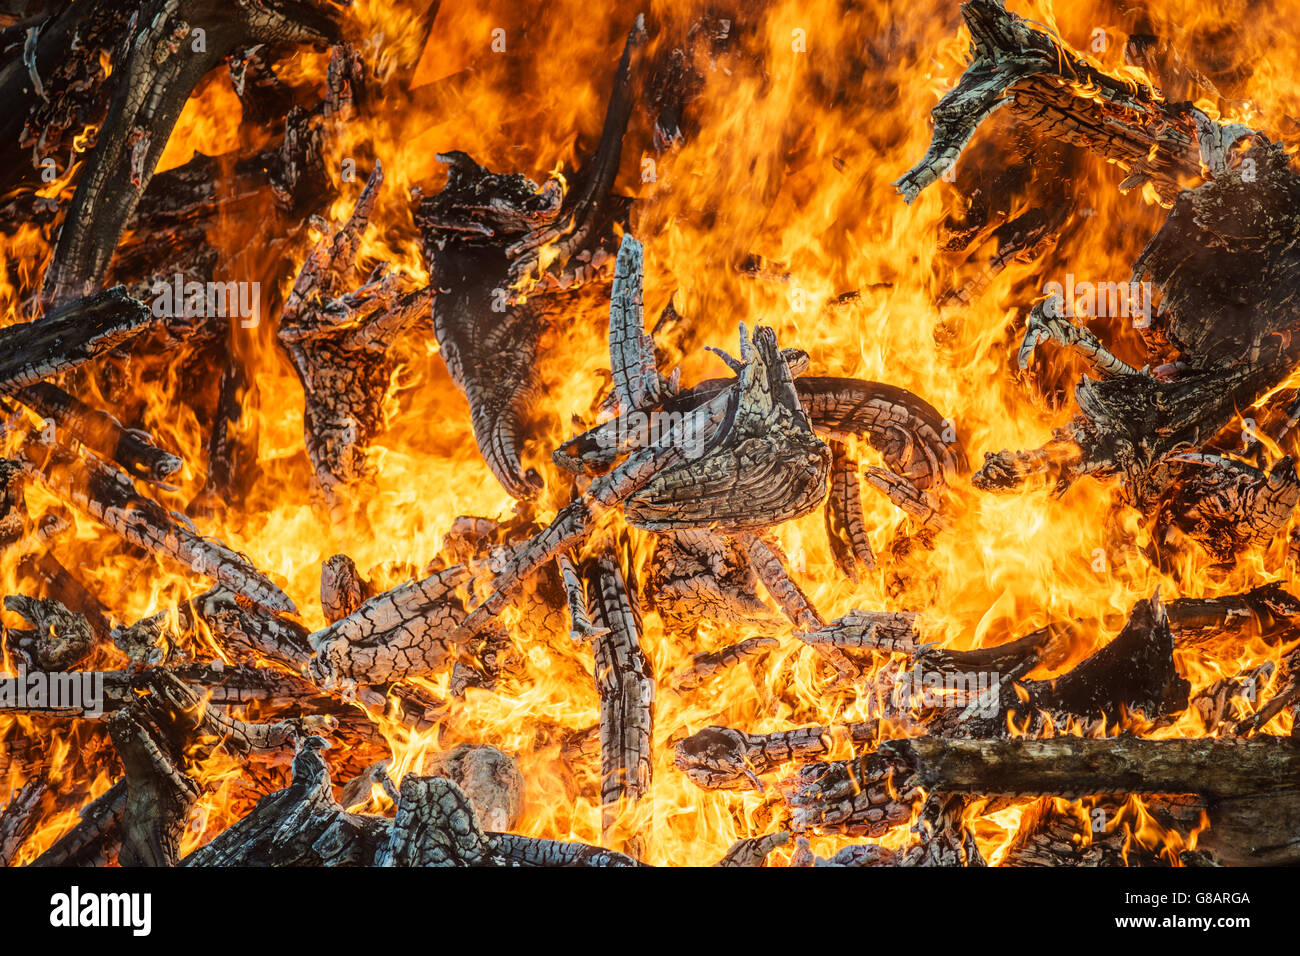 Great bonfire closeup, bright orange fire flames and firewood background Stock Photo